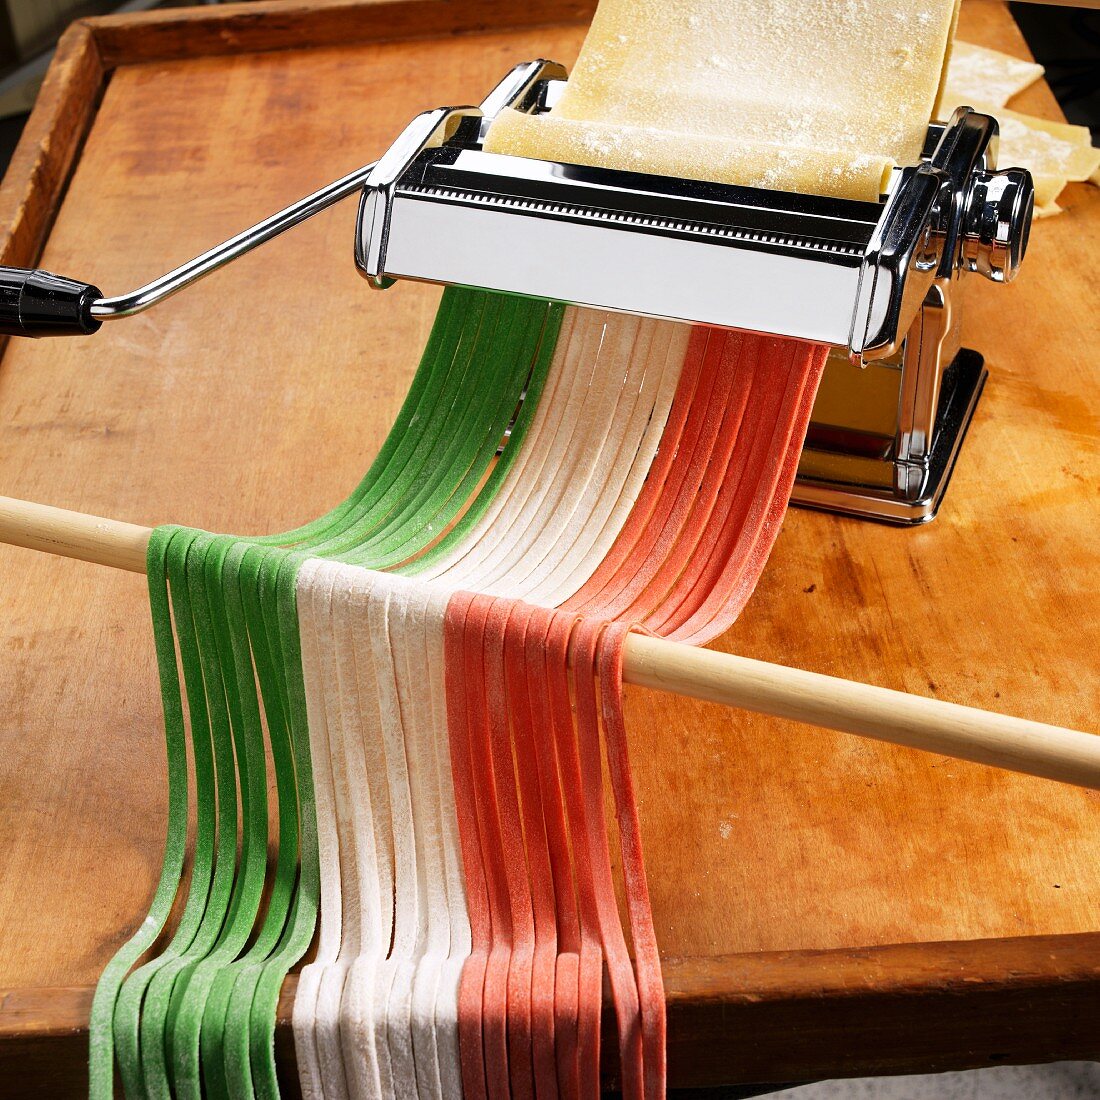 Pasta Maker with Homemade Green, White and Red Noodles